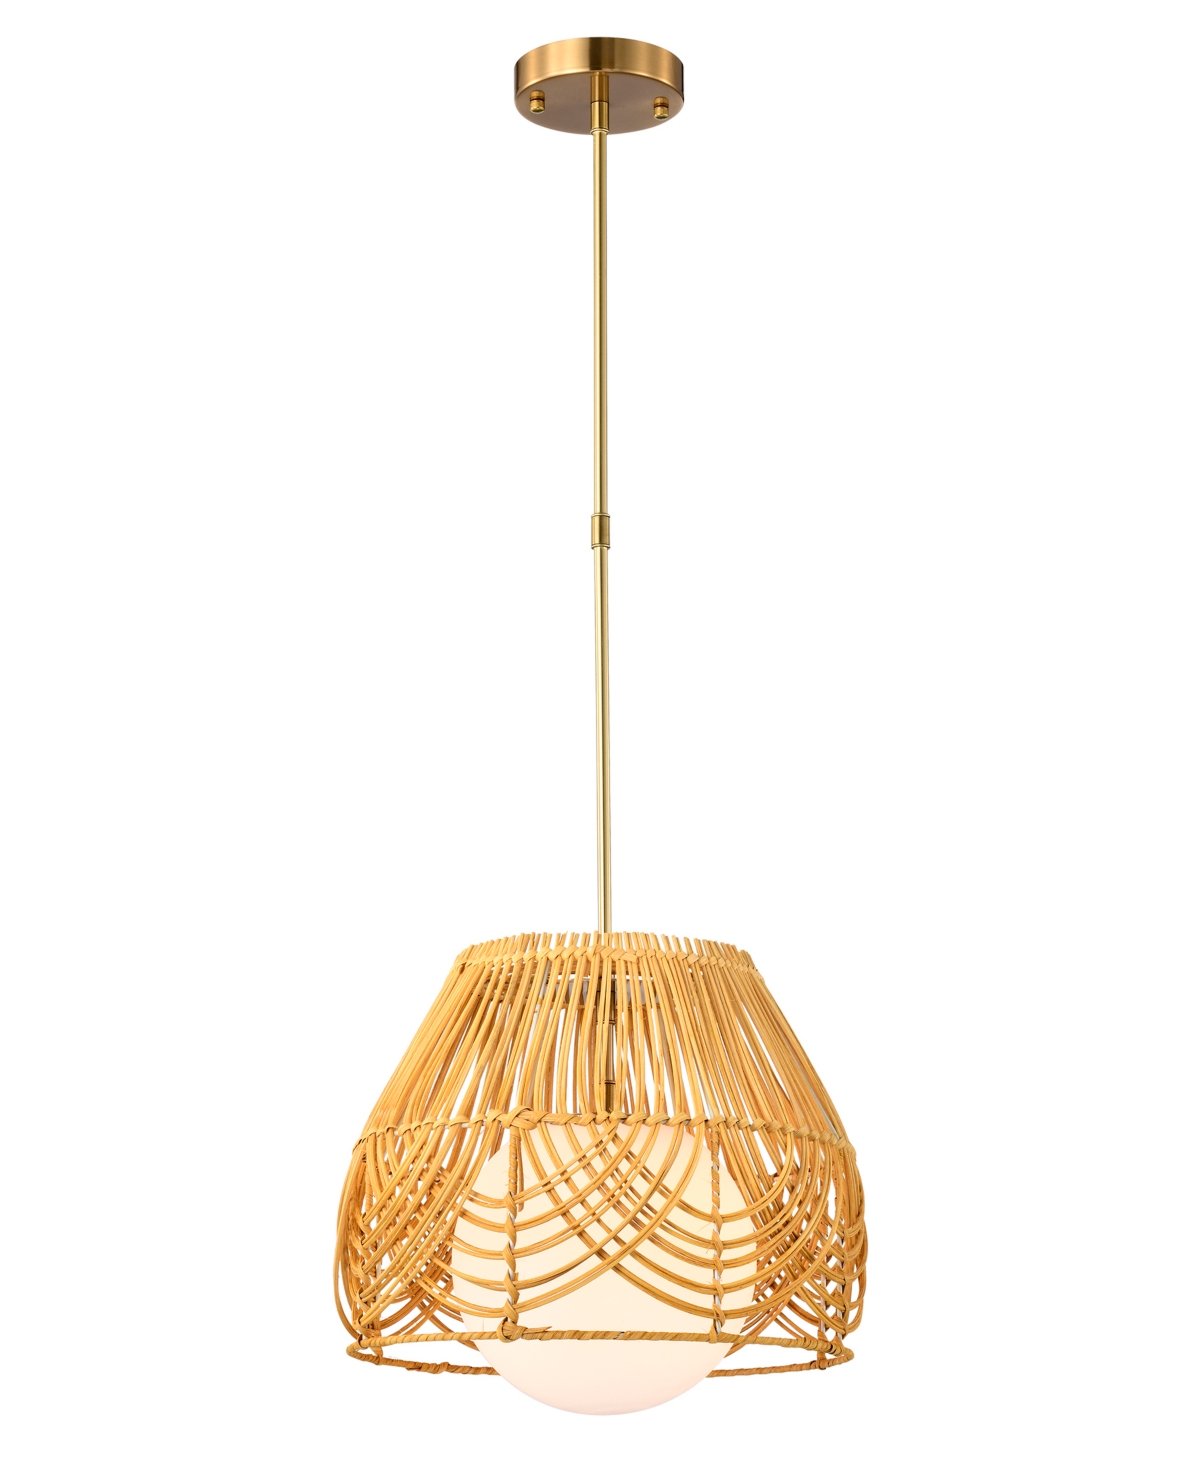 Home Accessories Lotta 13" Indoor Finish Pendant With Light Kit In Brass And Woven Rattan